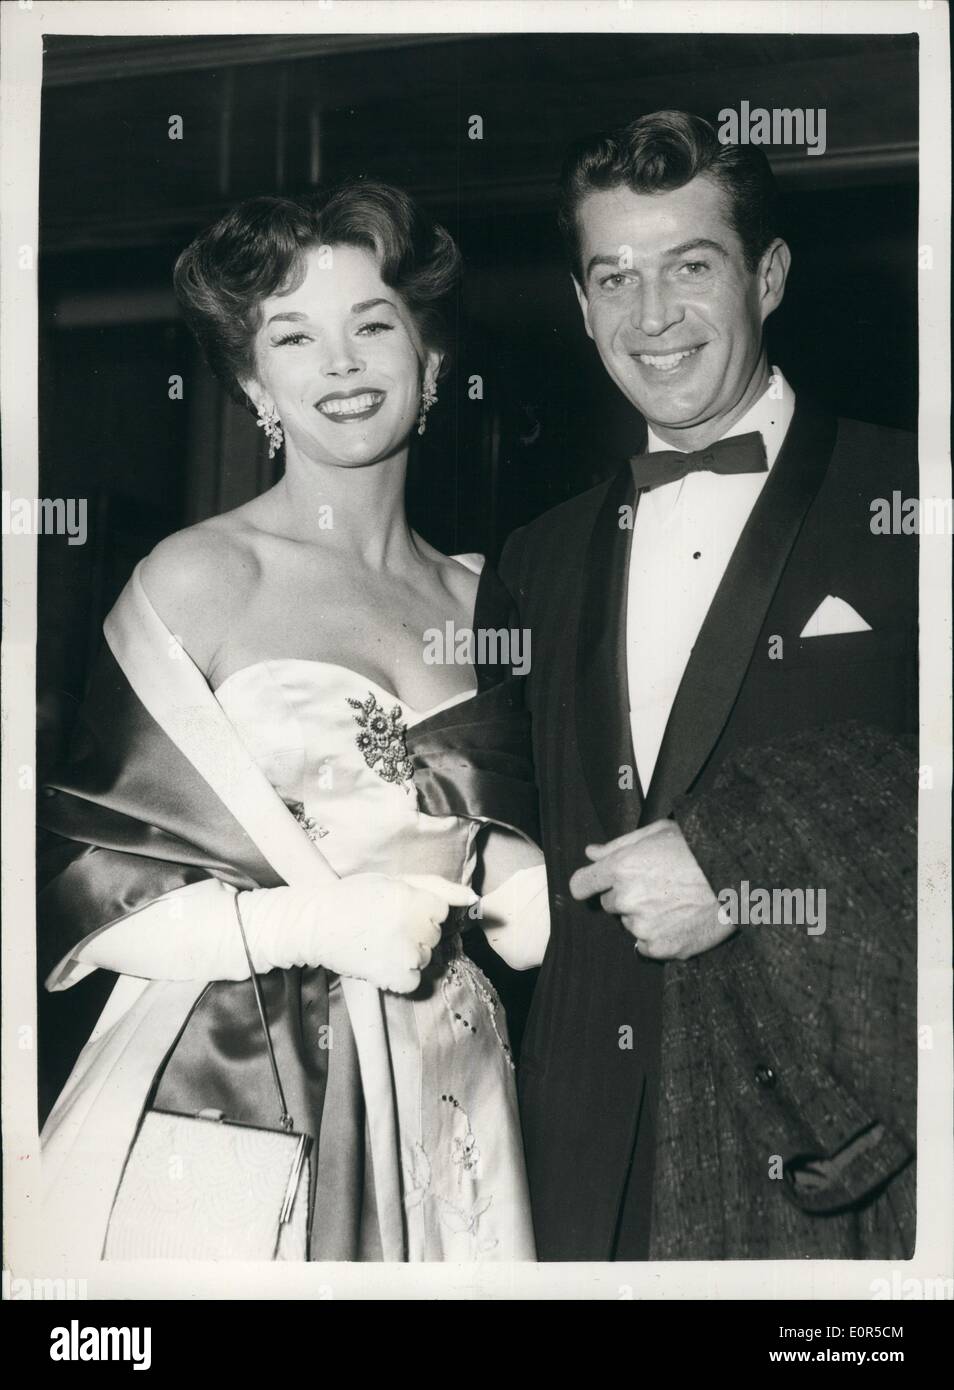 Mar. 03, 1958 - World Premiere Of ''The Silent Enemy'': The world premiere of the film ''The Silent Enemy'' - and the British Film Academy Awards Presentation, took place this evening at the Odeon, Leicester Square. Photo shows Film actress Dawn Addams, wife of Prince Vittorio Massimo, arriving at the -Odeon this evening with American actor George Nader. Stock Photo